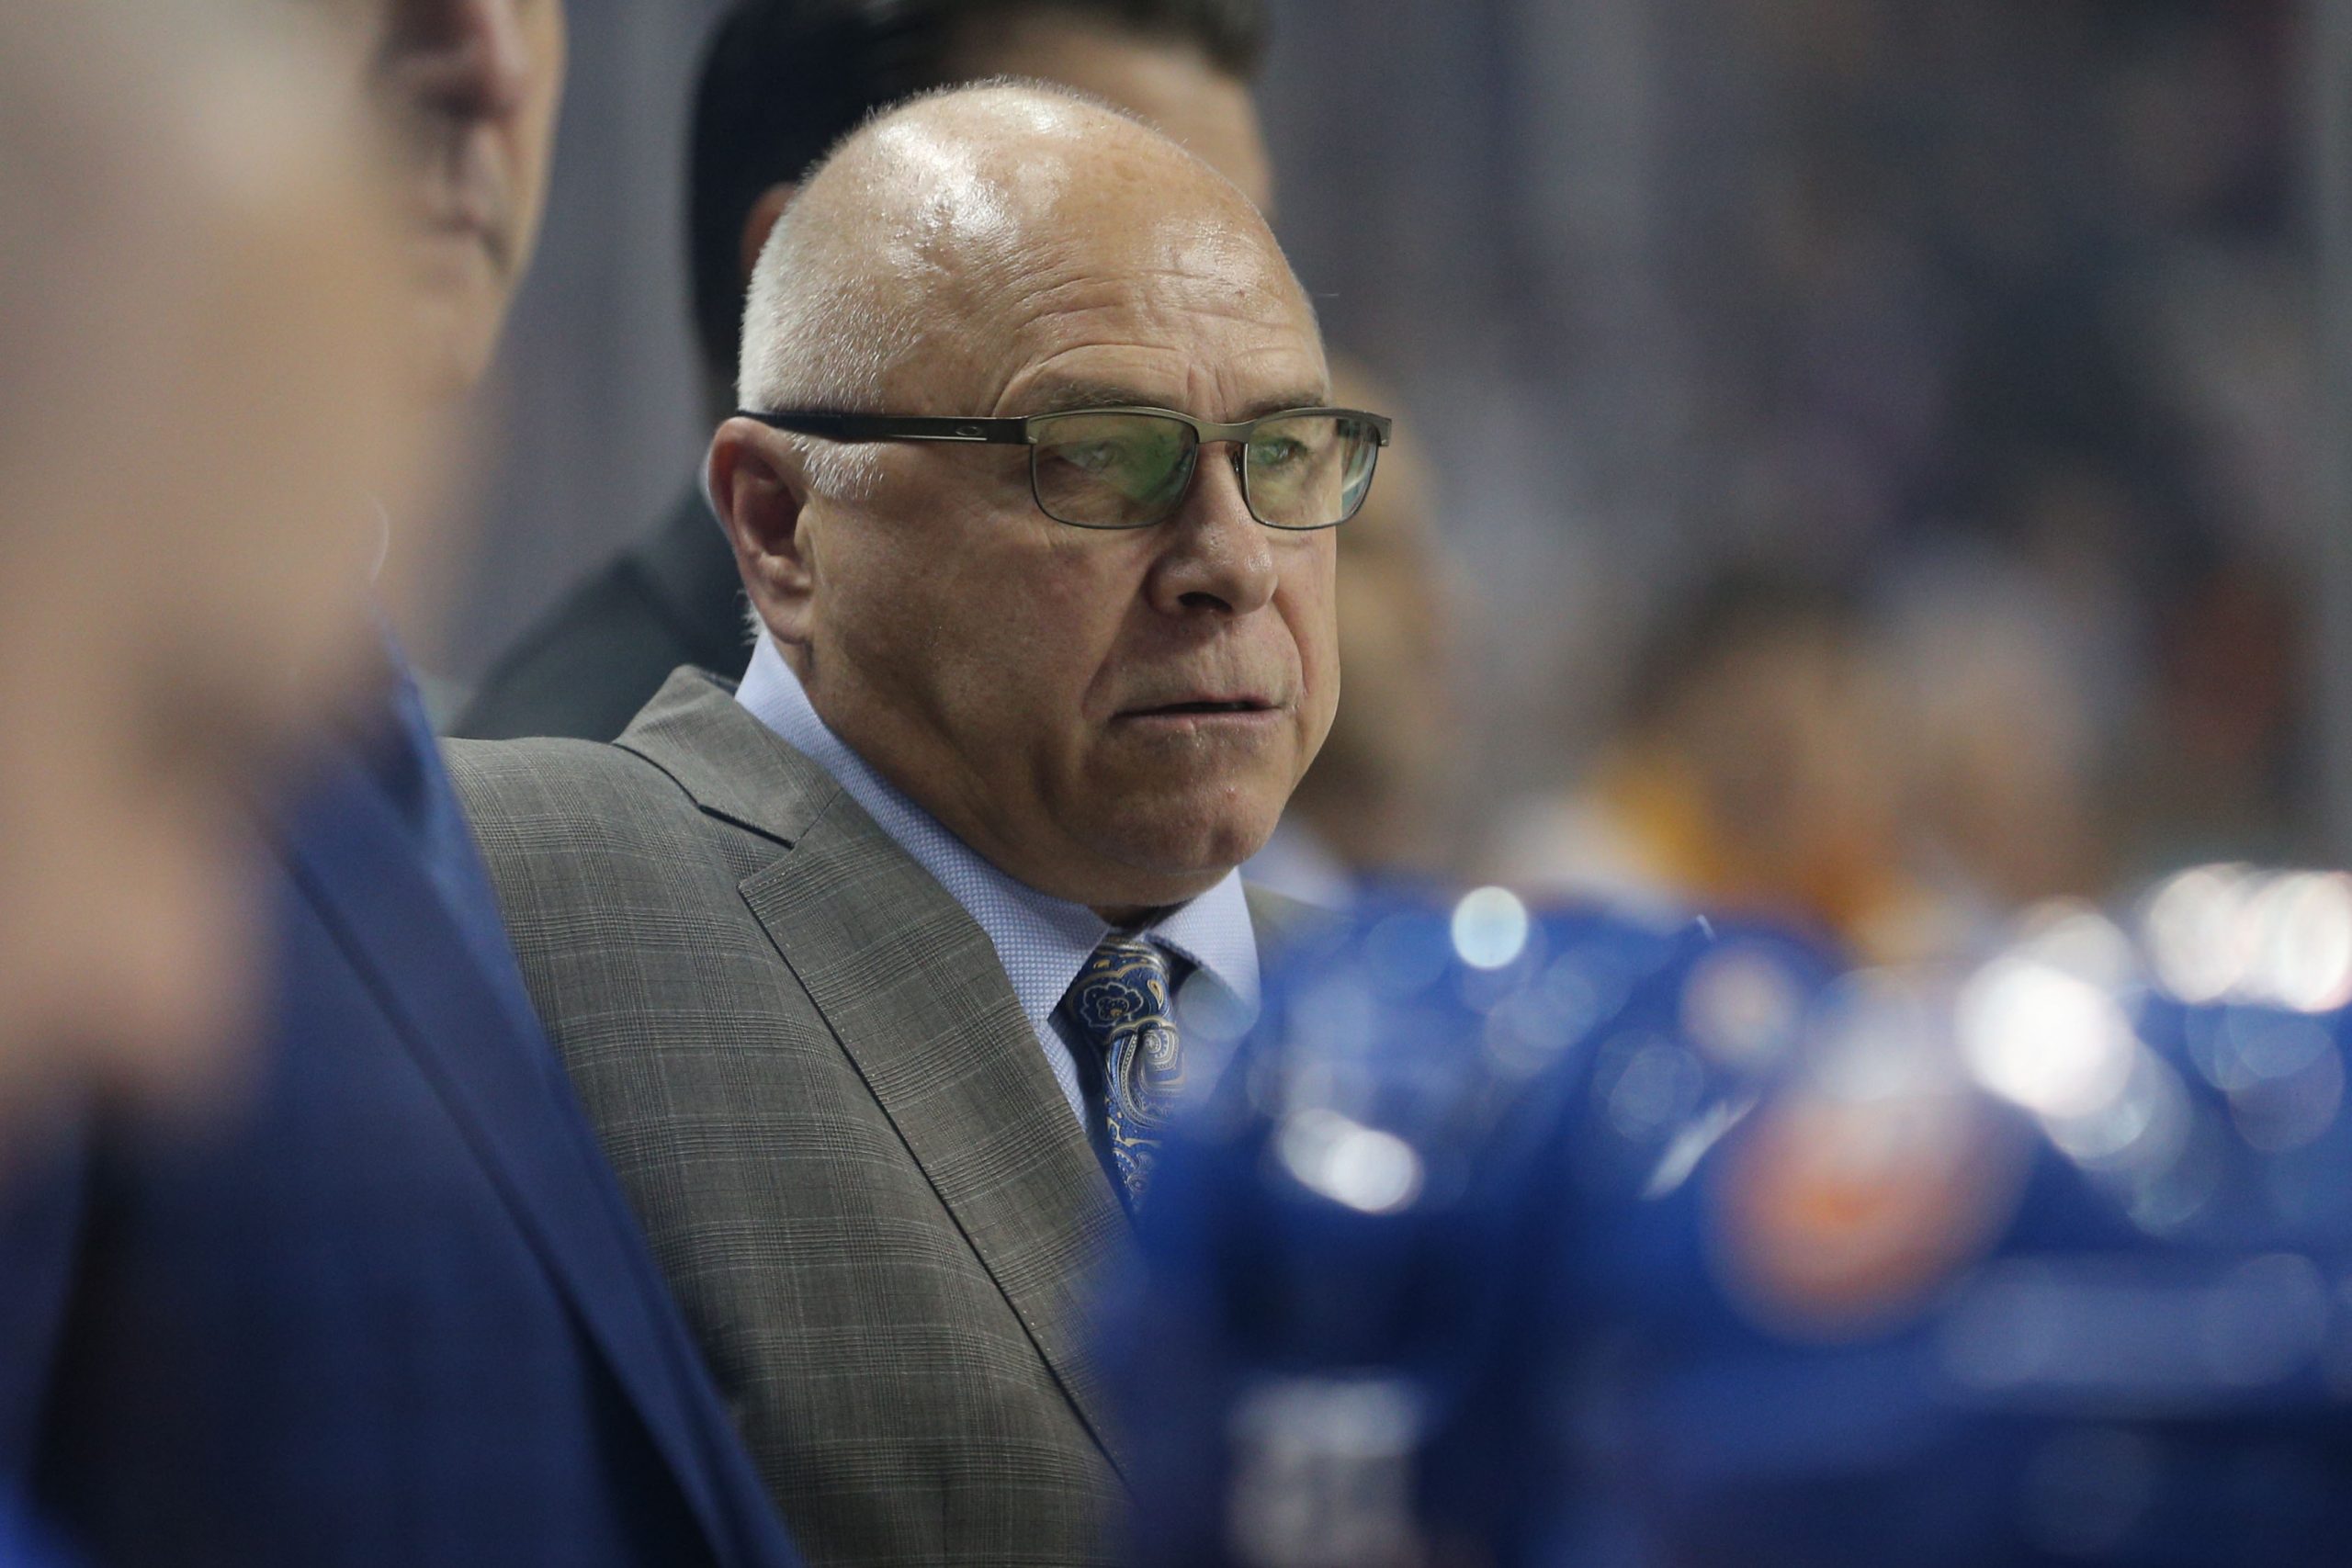 Oct 6, 2018; Brooklyn, NY, USA; New York Islanders head coach Barry Trotz coaches against the Nashville Predators during the first period at Barclays Center. Mandatory Credit: Brad Penner-USA TODAY Sports